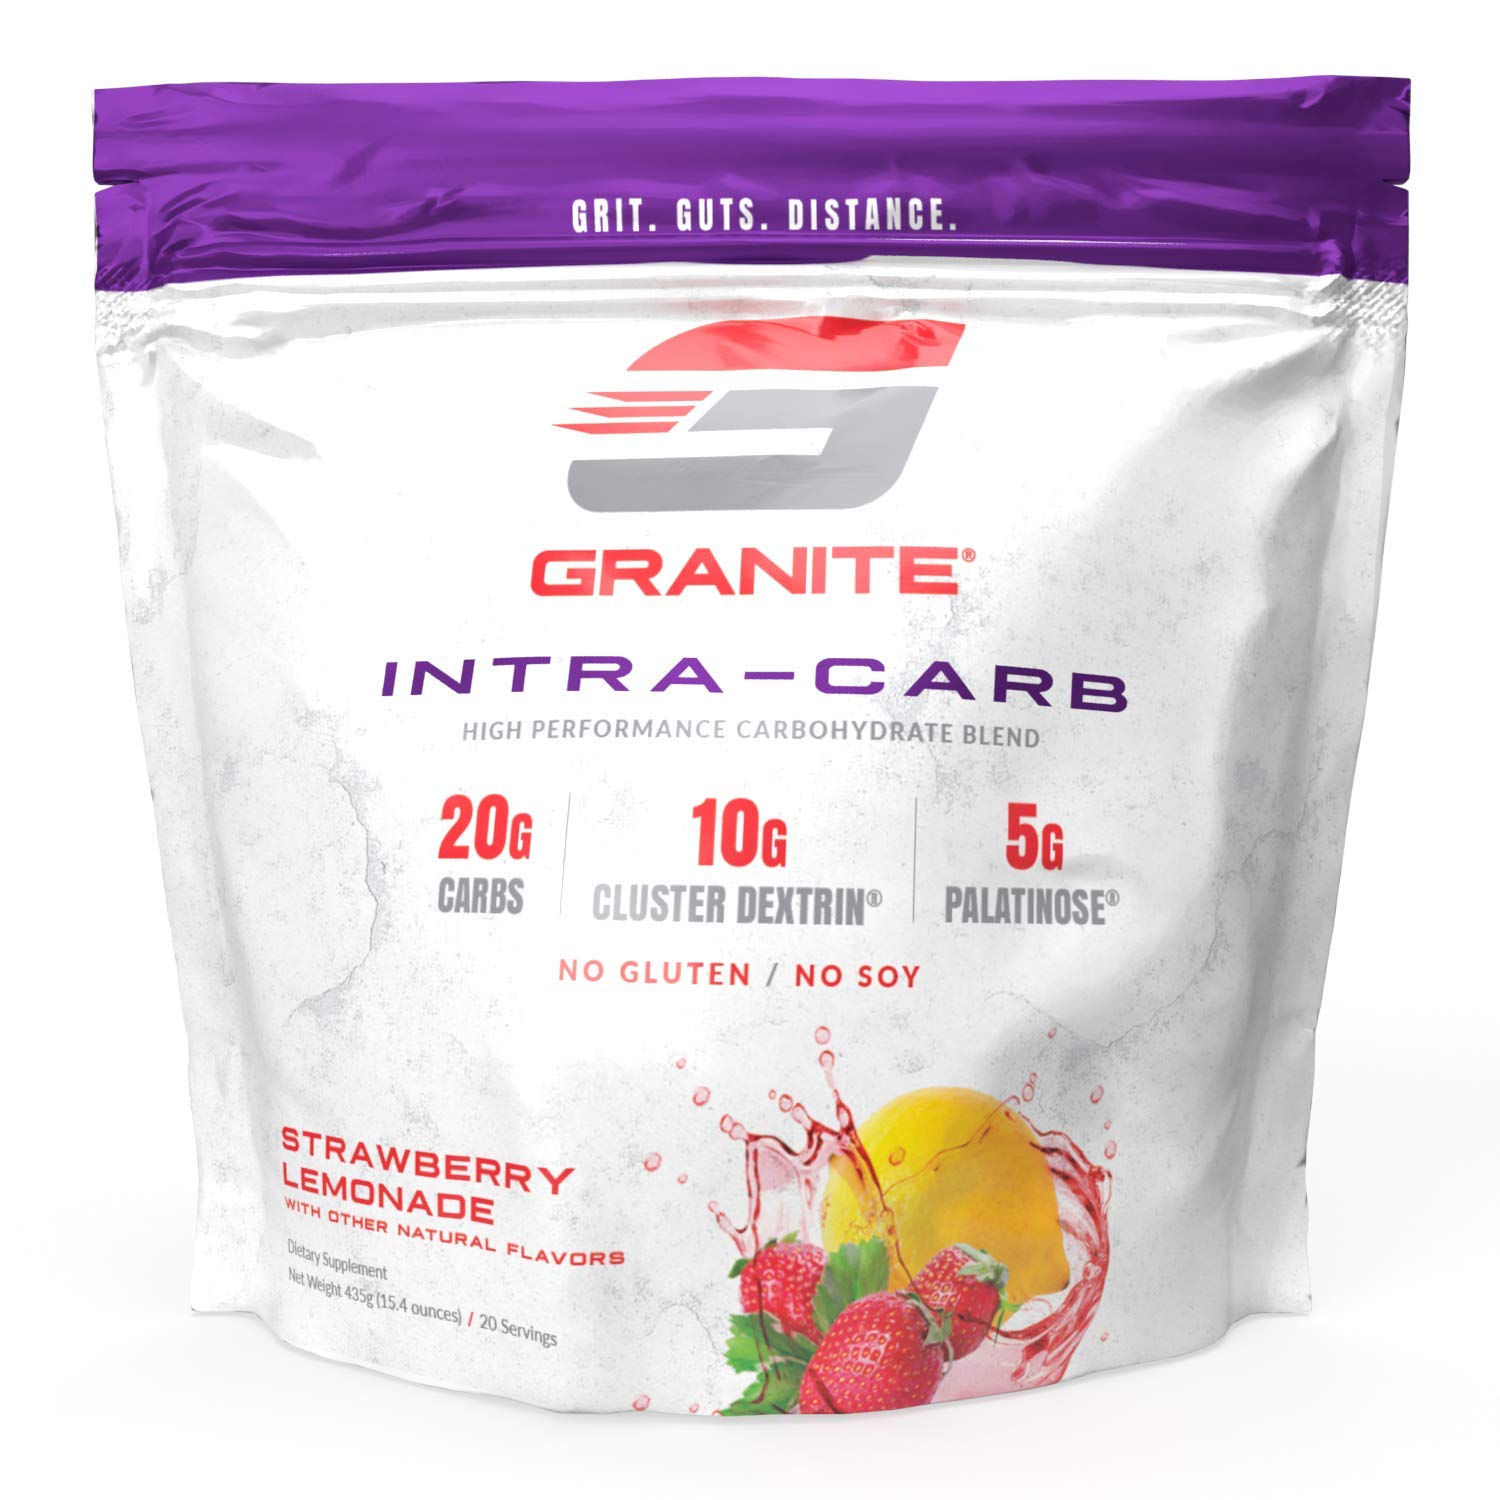 Granite® Intra-CARB Advanced Carb Supplement (Strawberry Lemonade) | 20g Carbs + 10g Cluster Dextrin® + 5g Palatinose® | Train Longer w/No Crash | Soy Free + Gluten Free + Vegan | Made in USA